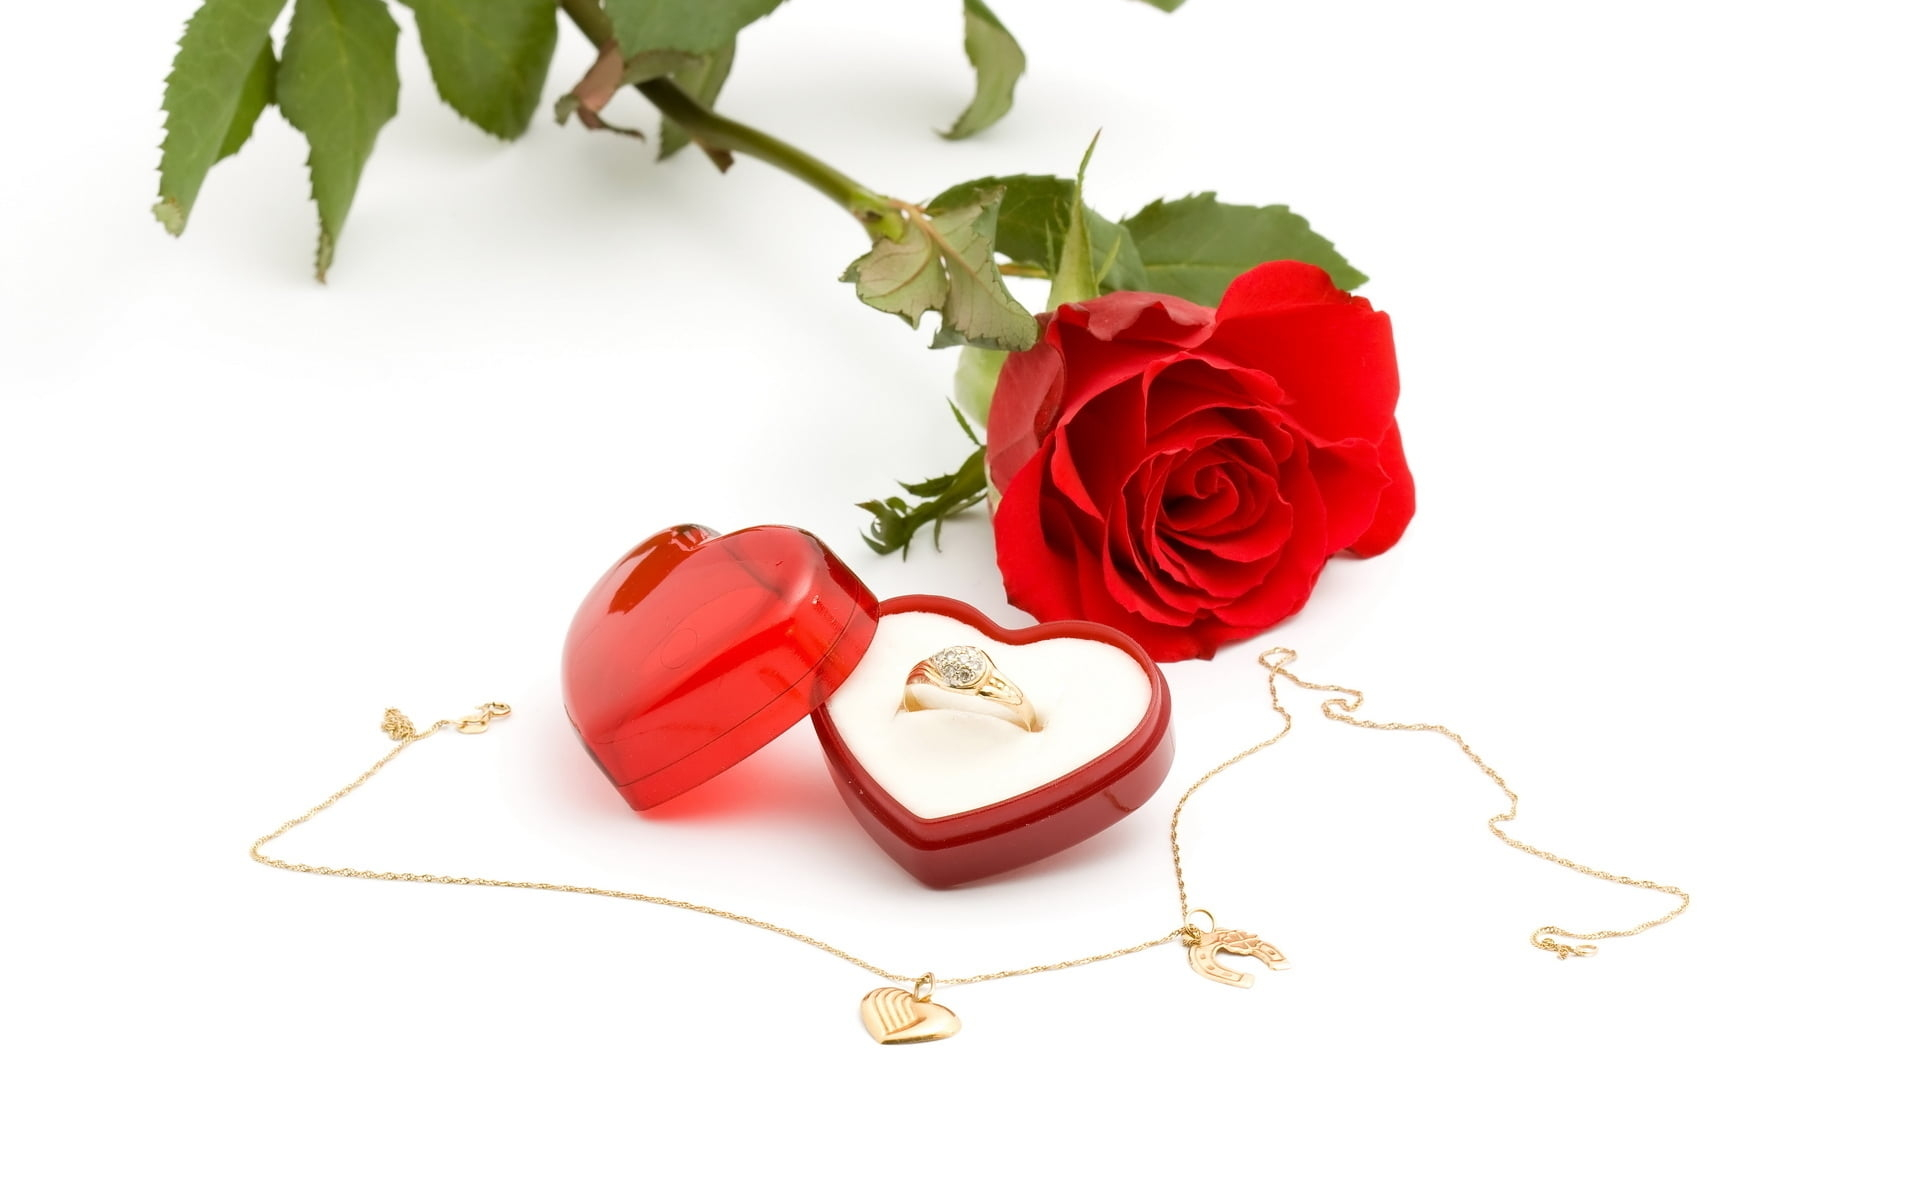 1920x1200 Heart-shaped red ring box with gold-colored ring beside red rose flower HD wallpaper